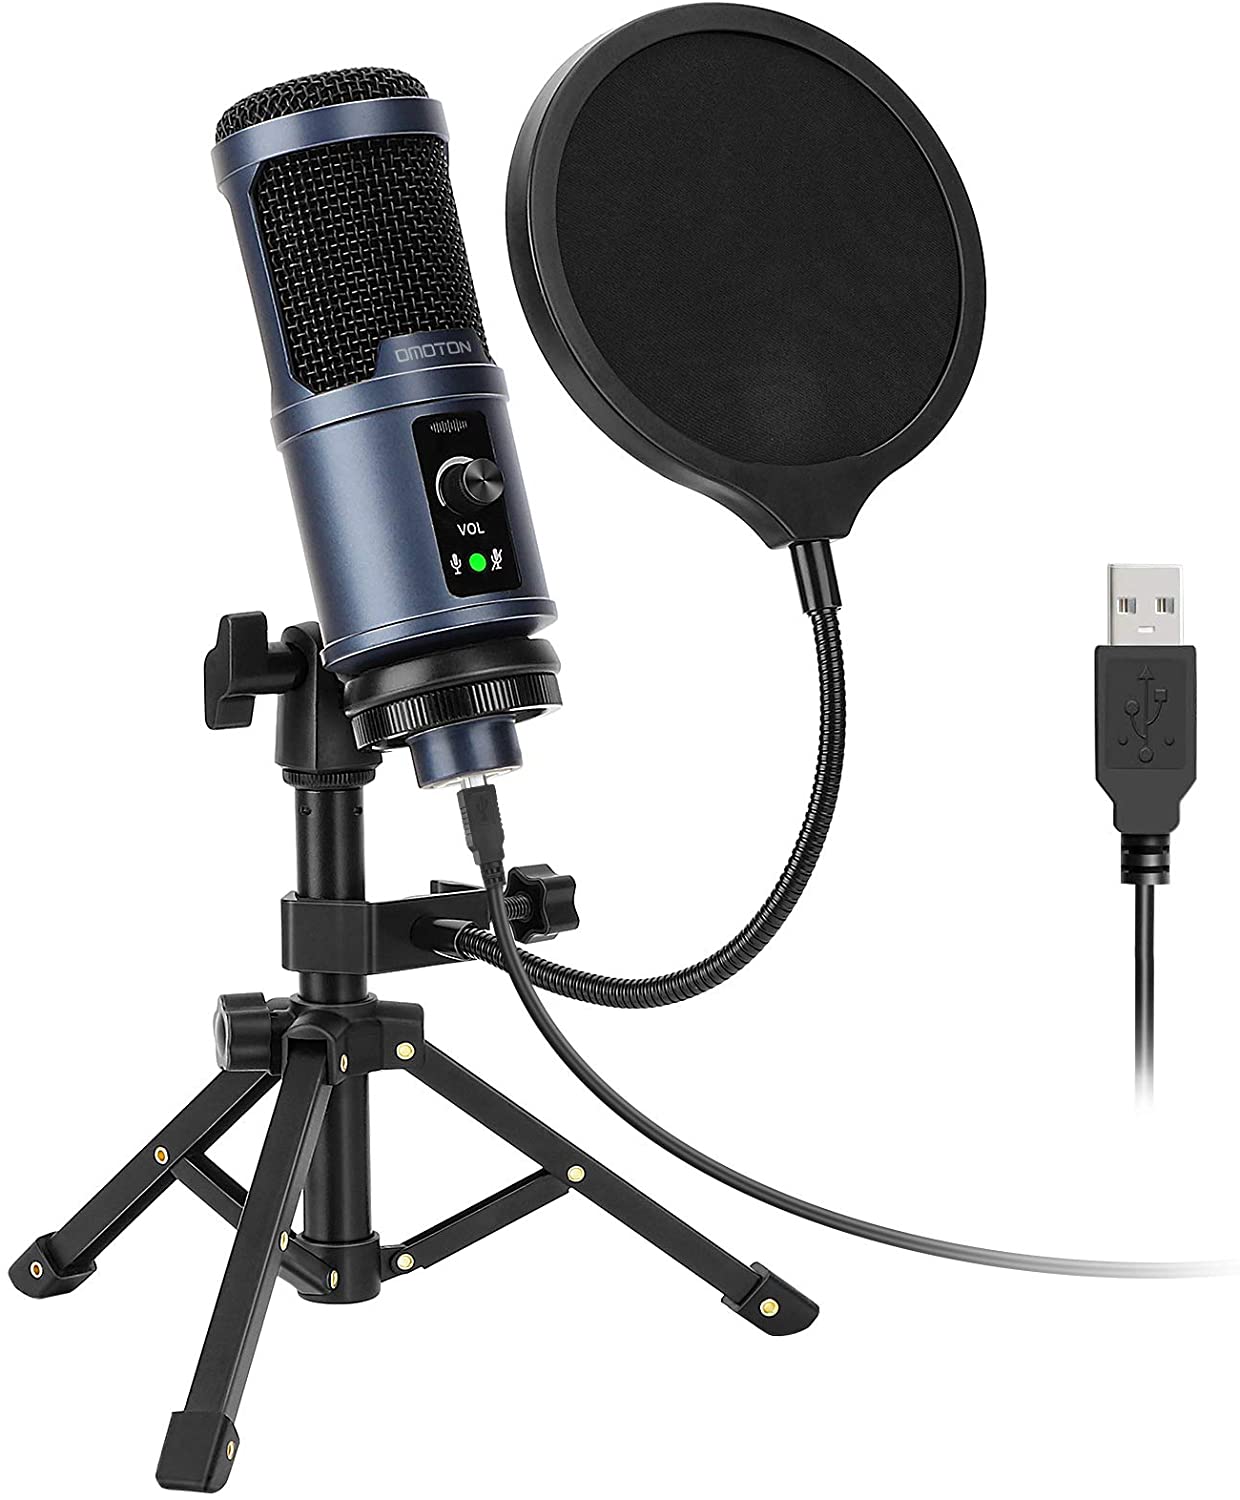 USB Computer Microphone with Adjustable Tripod Stand & Pop Filter $23.09 + Free Shipping